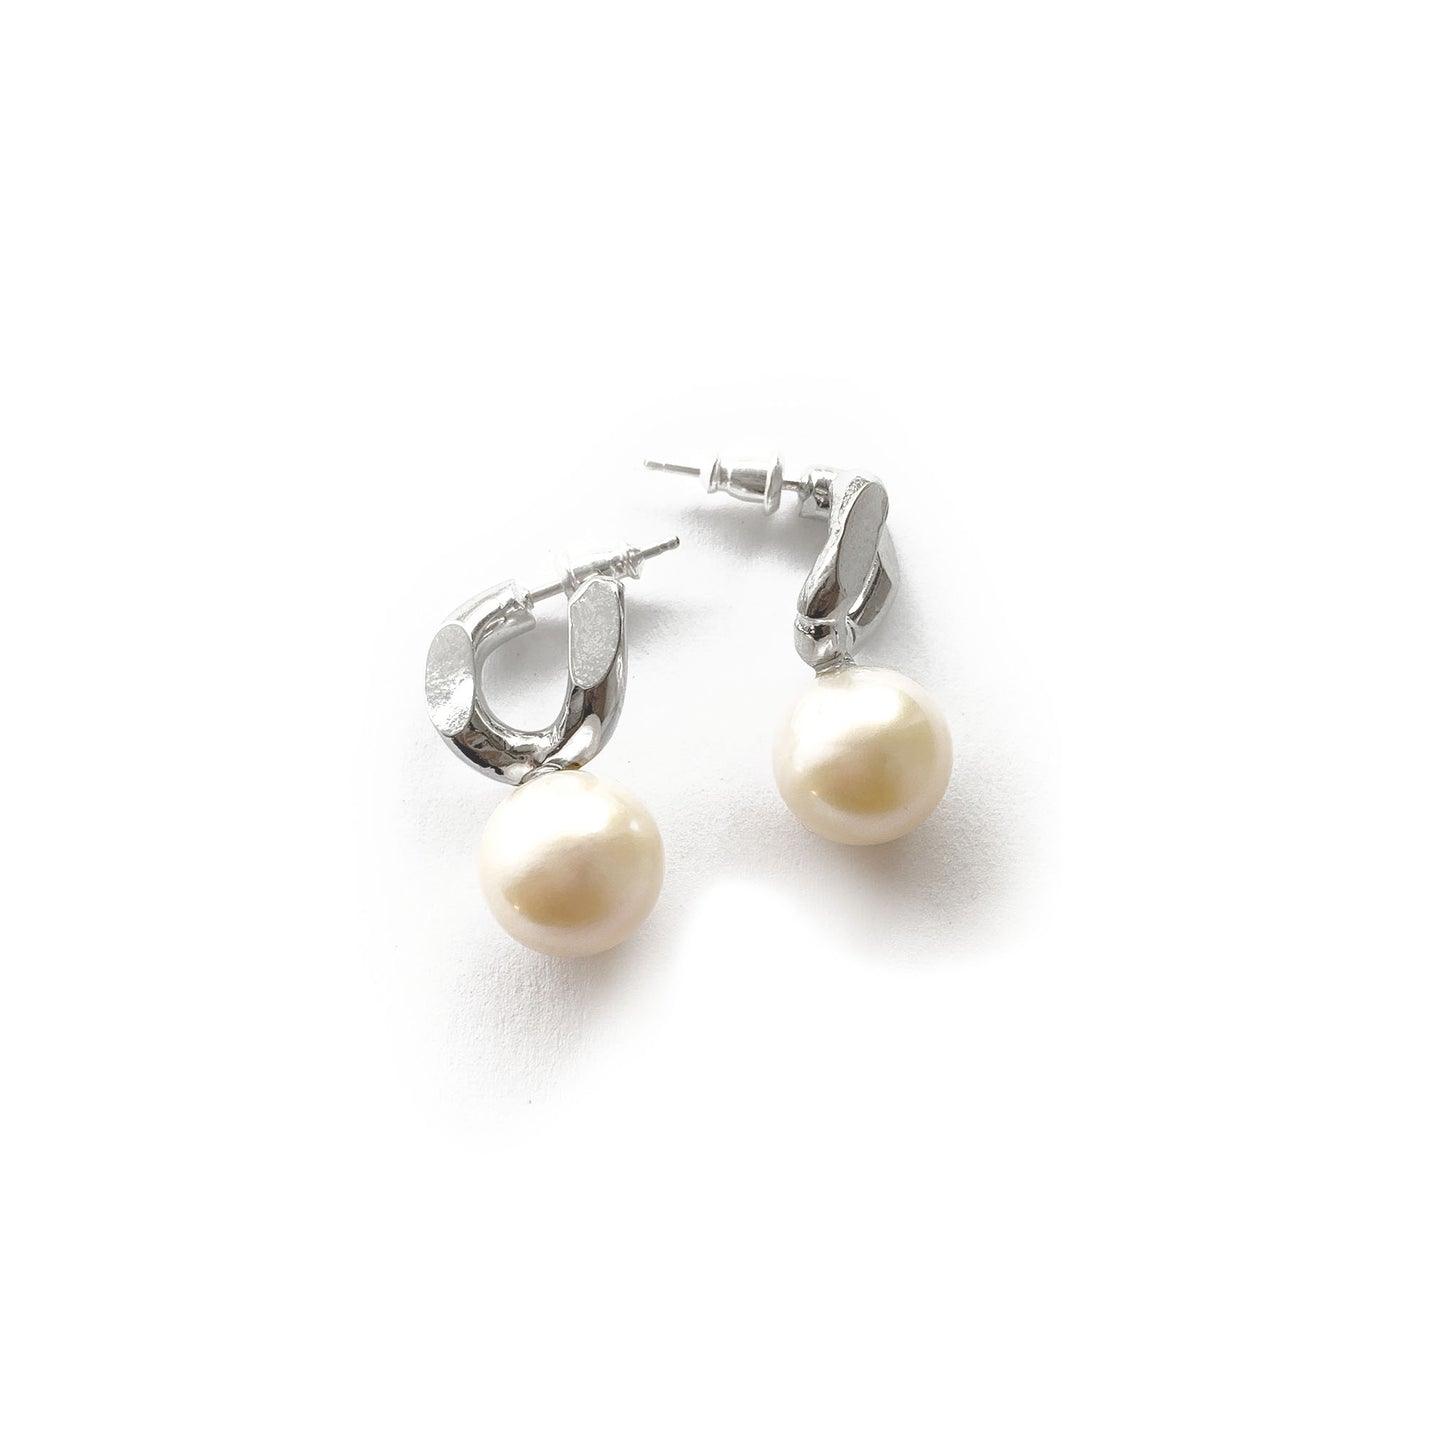 SMALL CHAINLINK AND OVERSIZED PEARL EARRINGS